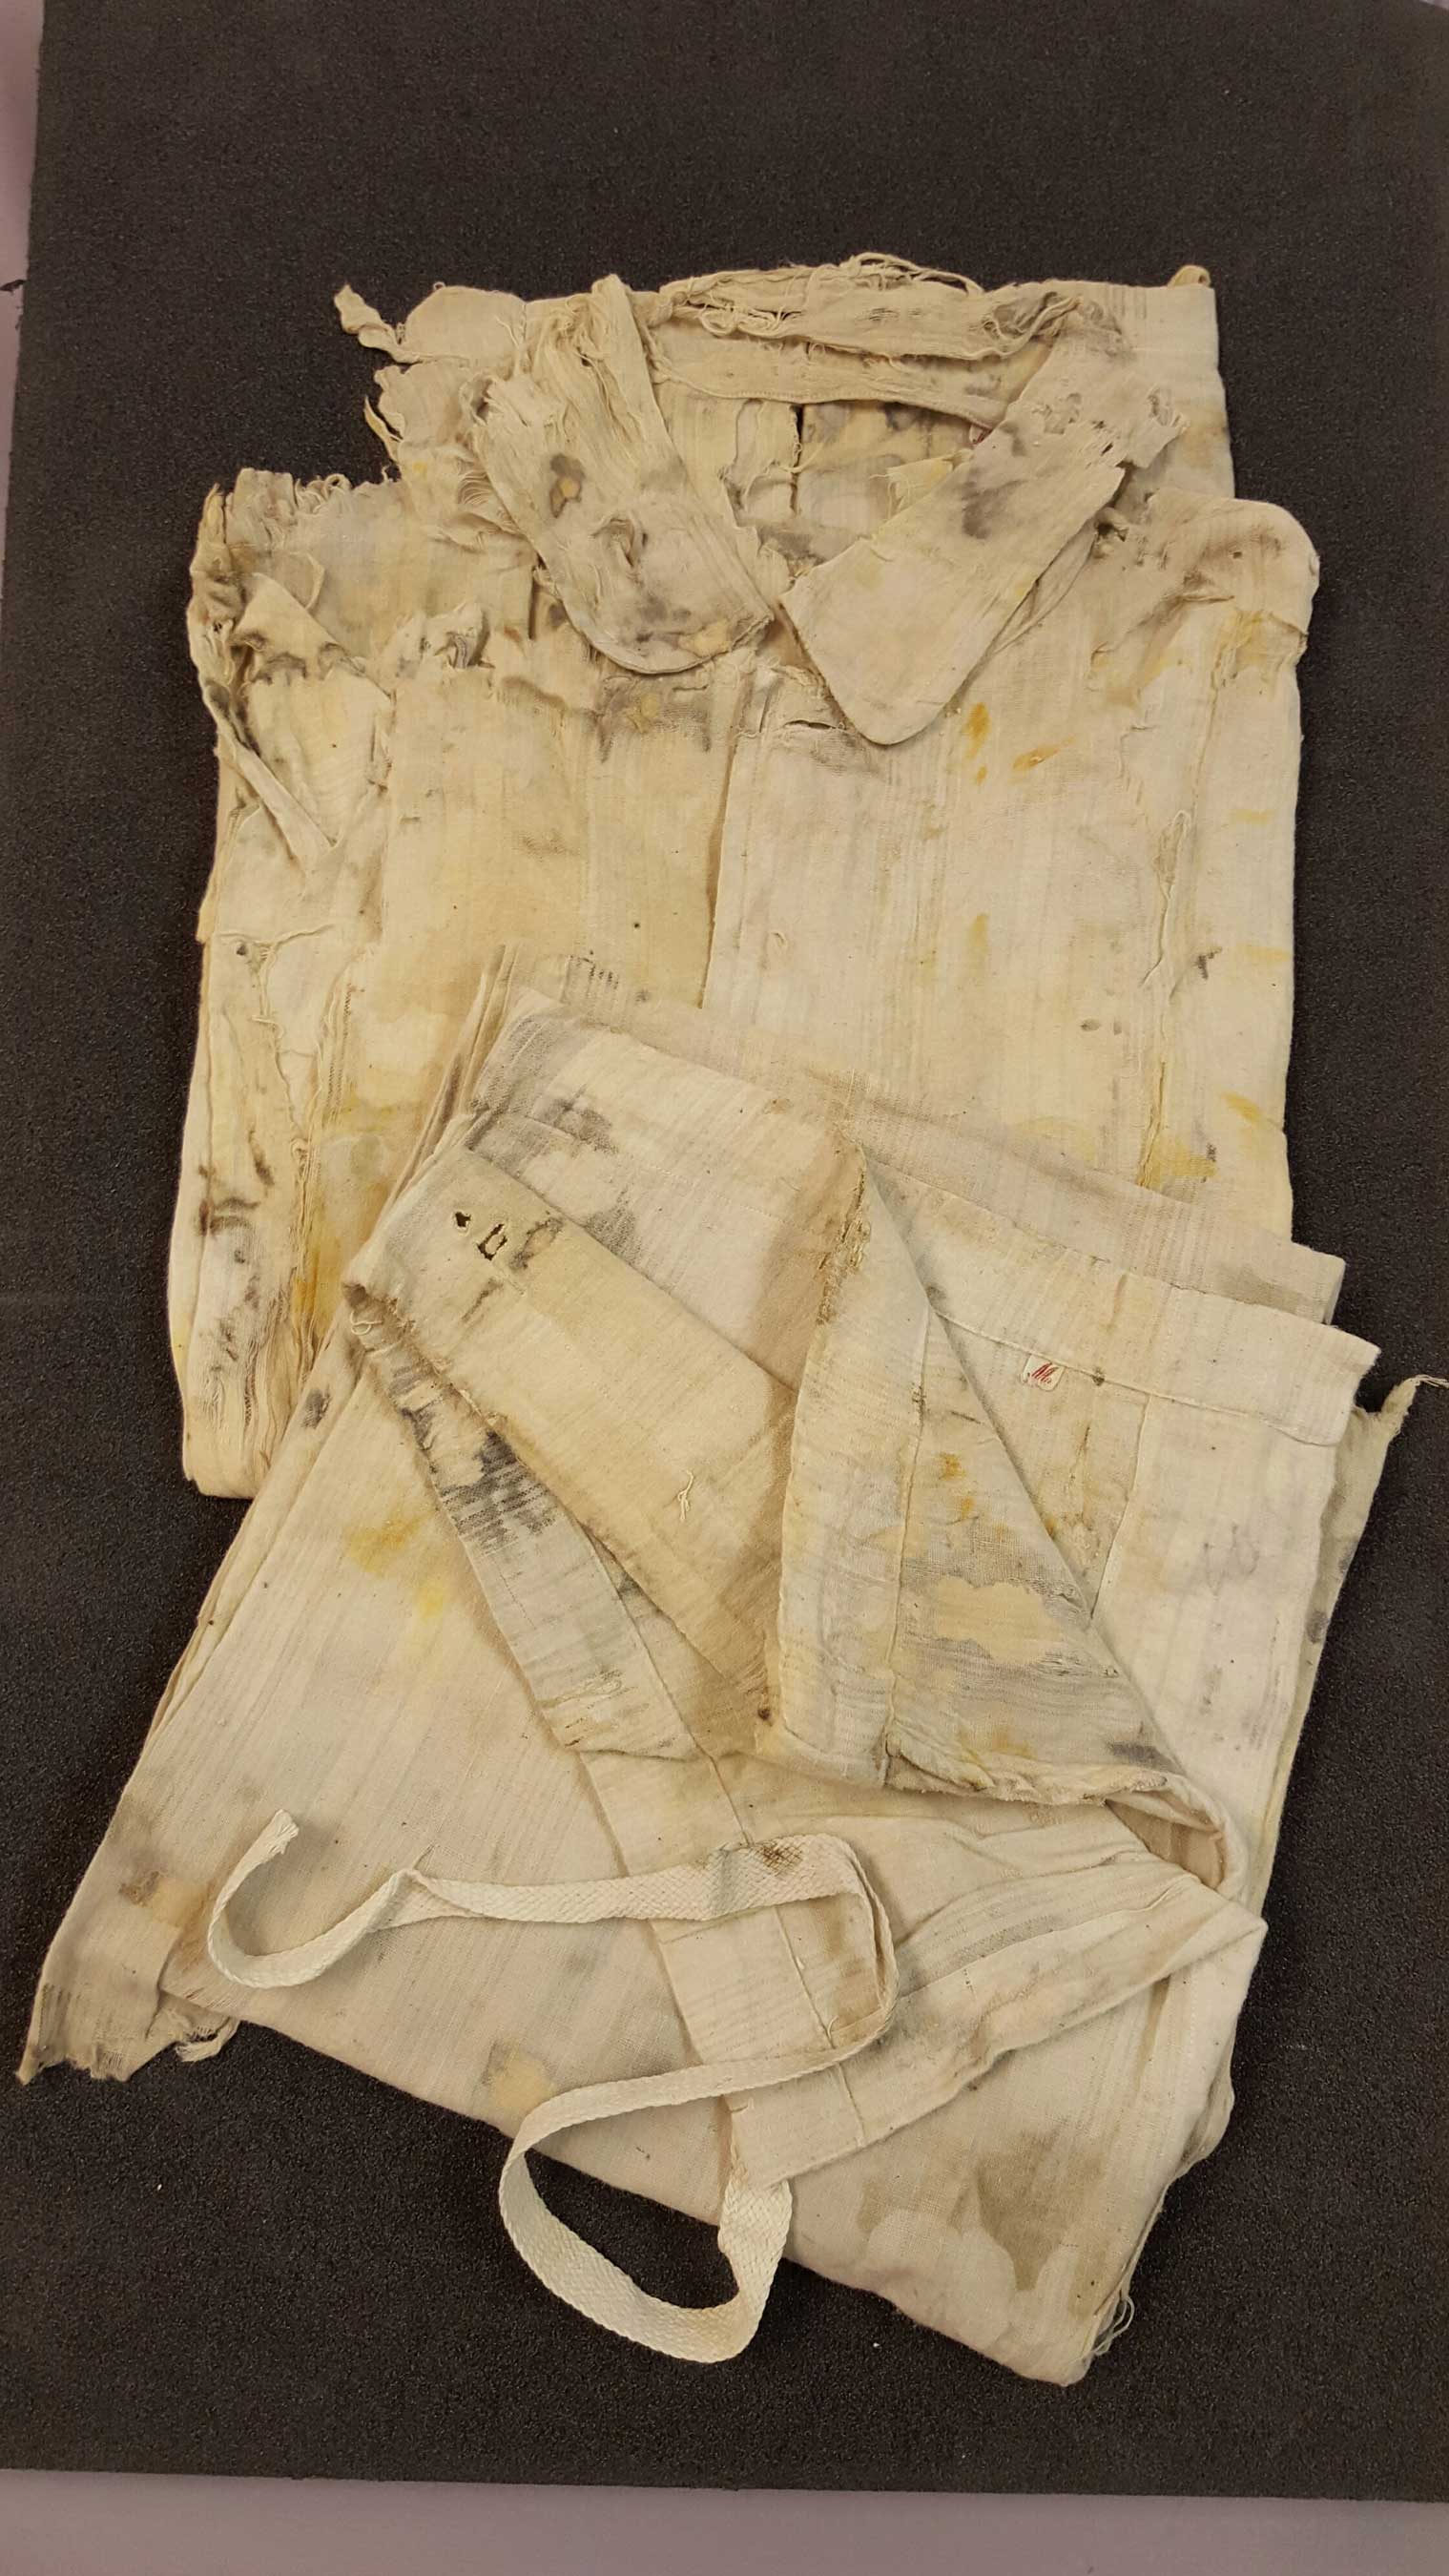 This pair of men’s pajamas is made of white cotton with blue stripes. No maker marks were found, they are a size medium with button shirt and drawstring bottoms. (Credit Premier Exhibitions)